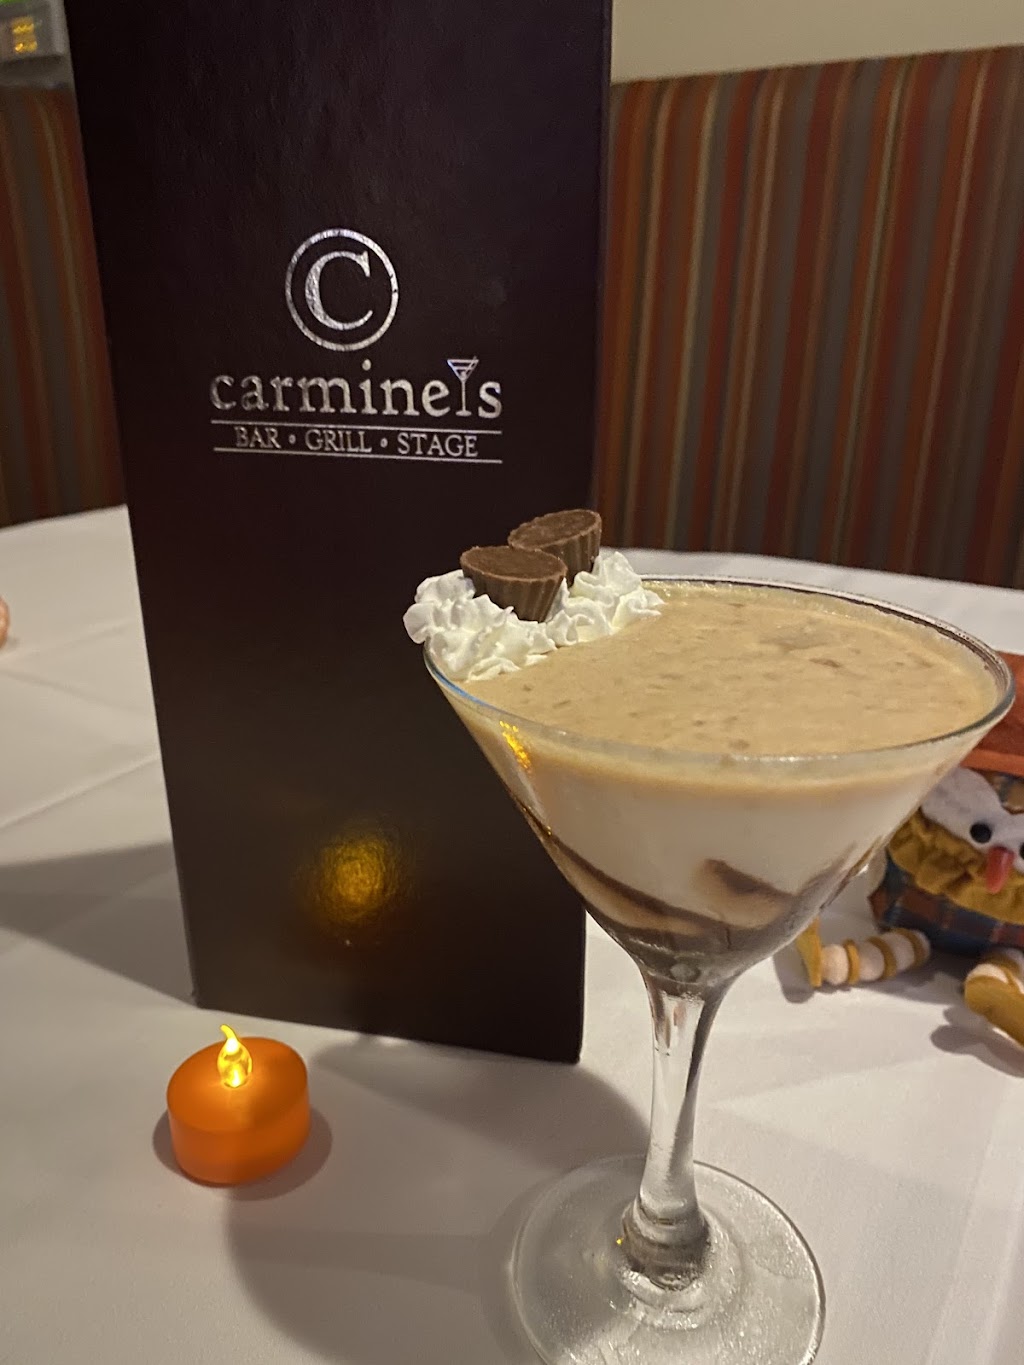 Carmines *Bar *Grill * Stage | 389 Main St, East Hartford, CT 06118 | Phone: (860) 206-4580